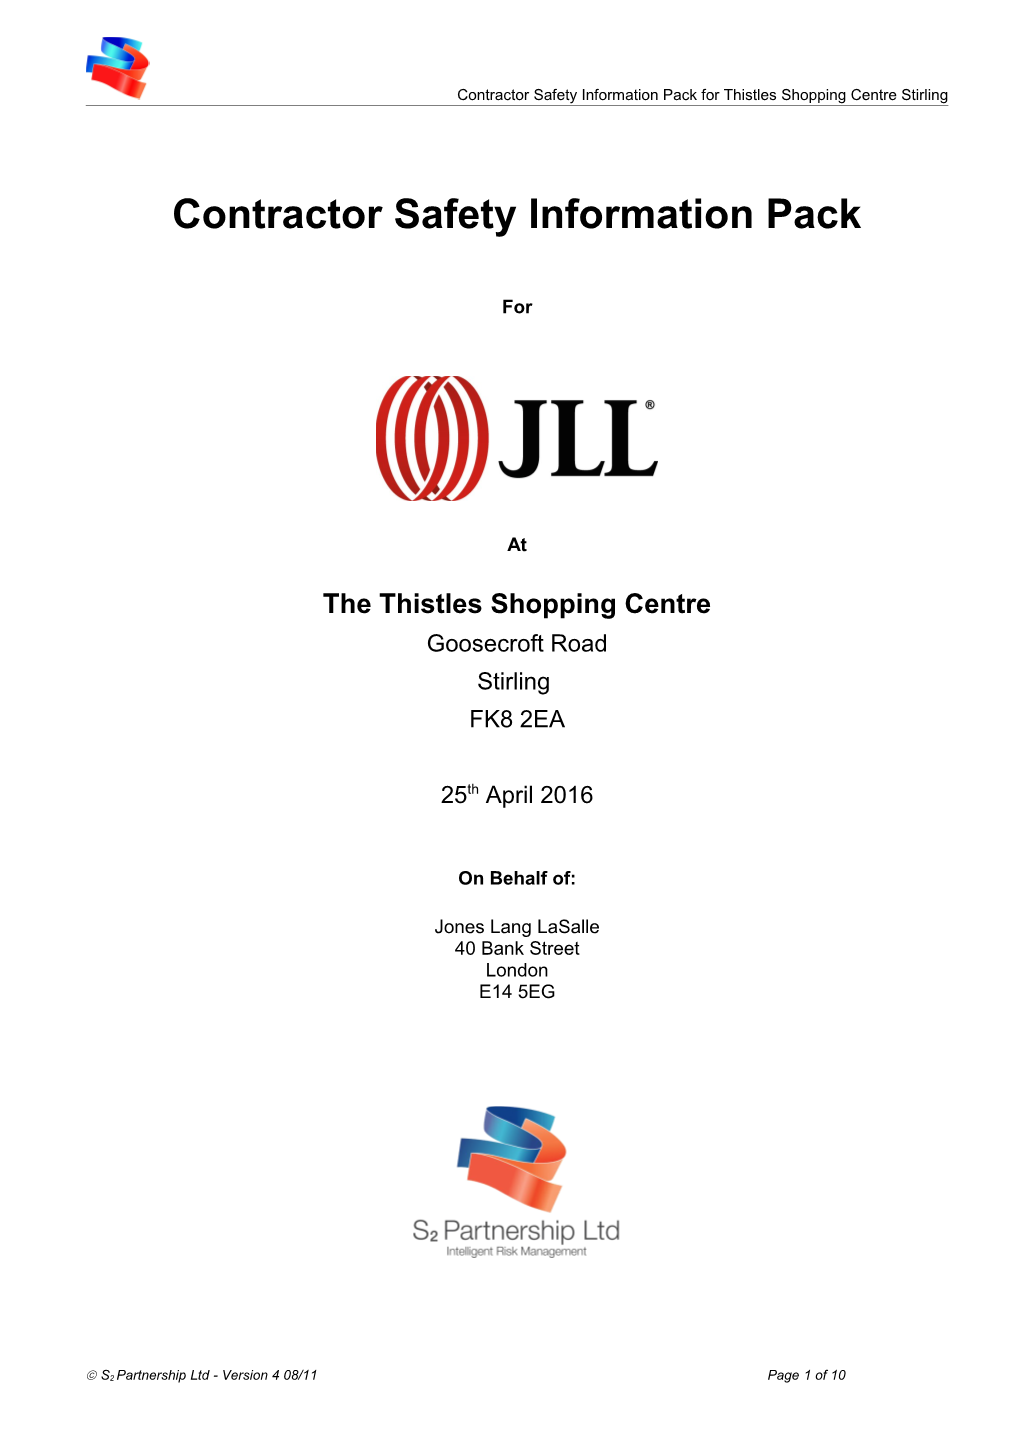 Contractor Safety Information Pack